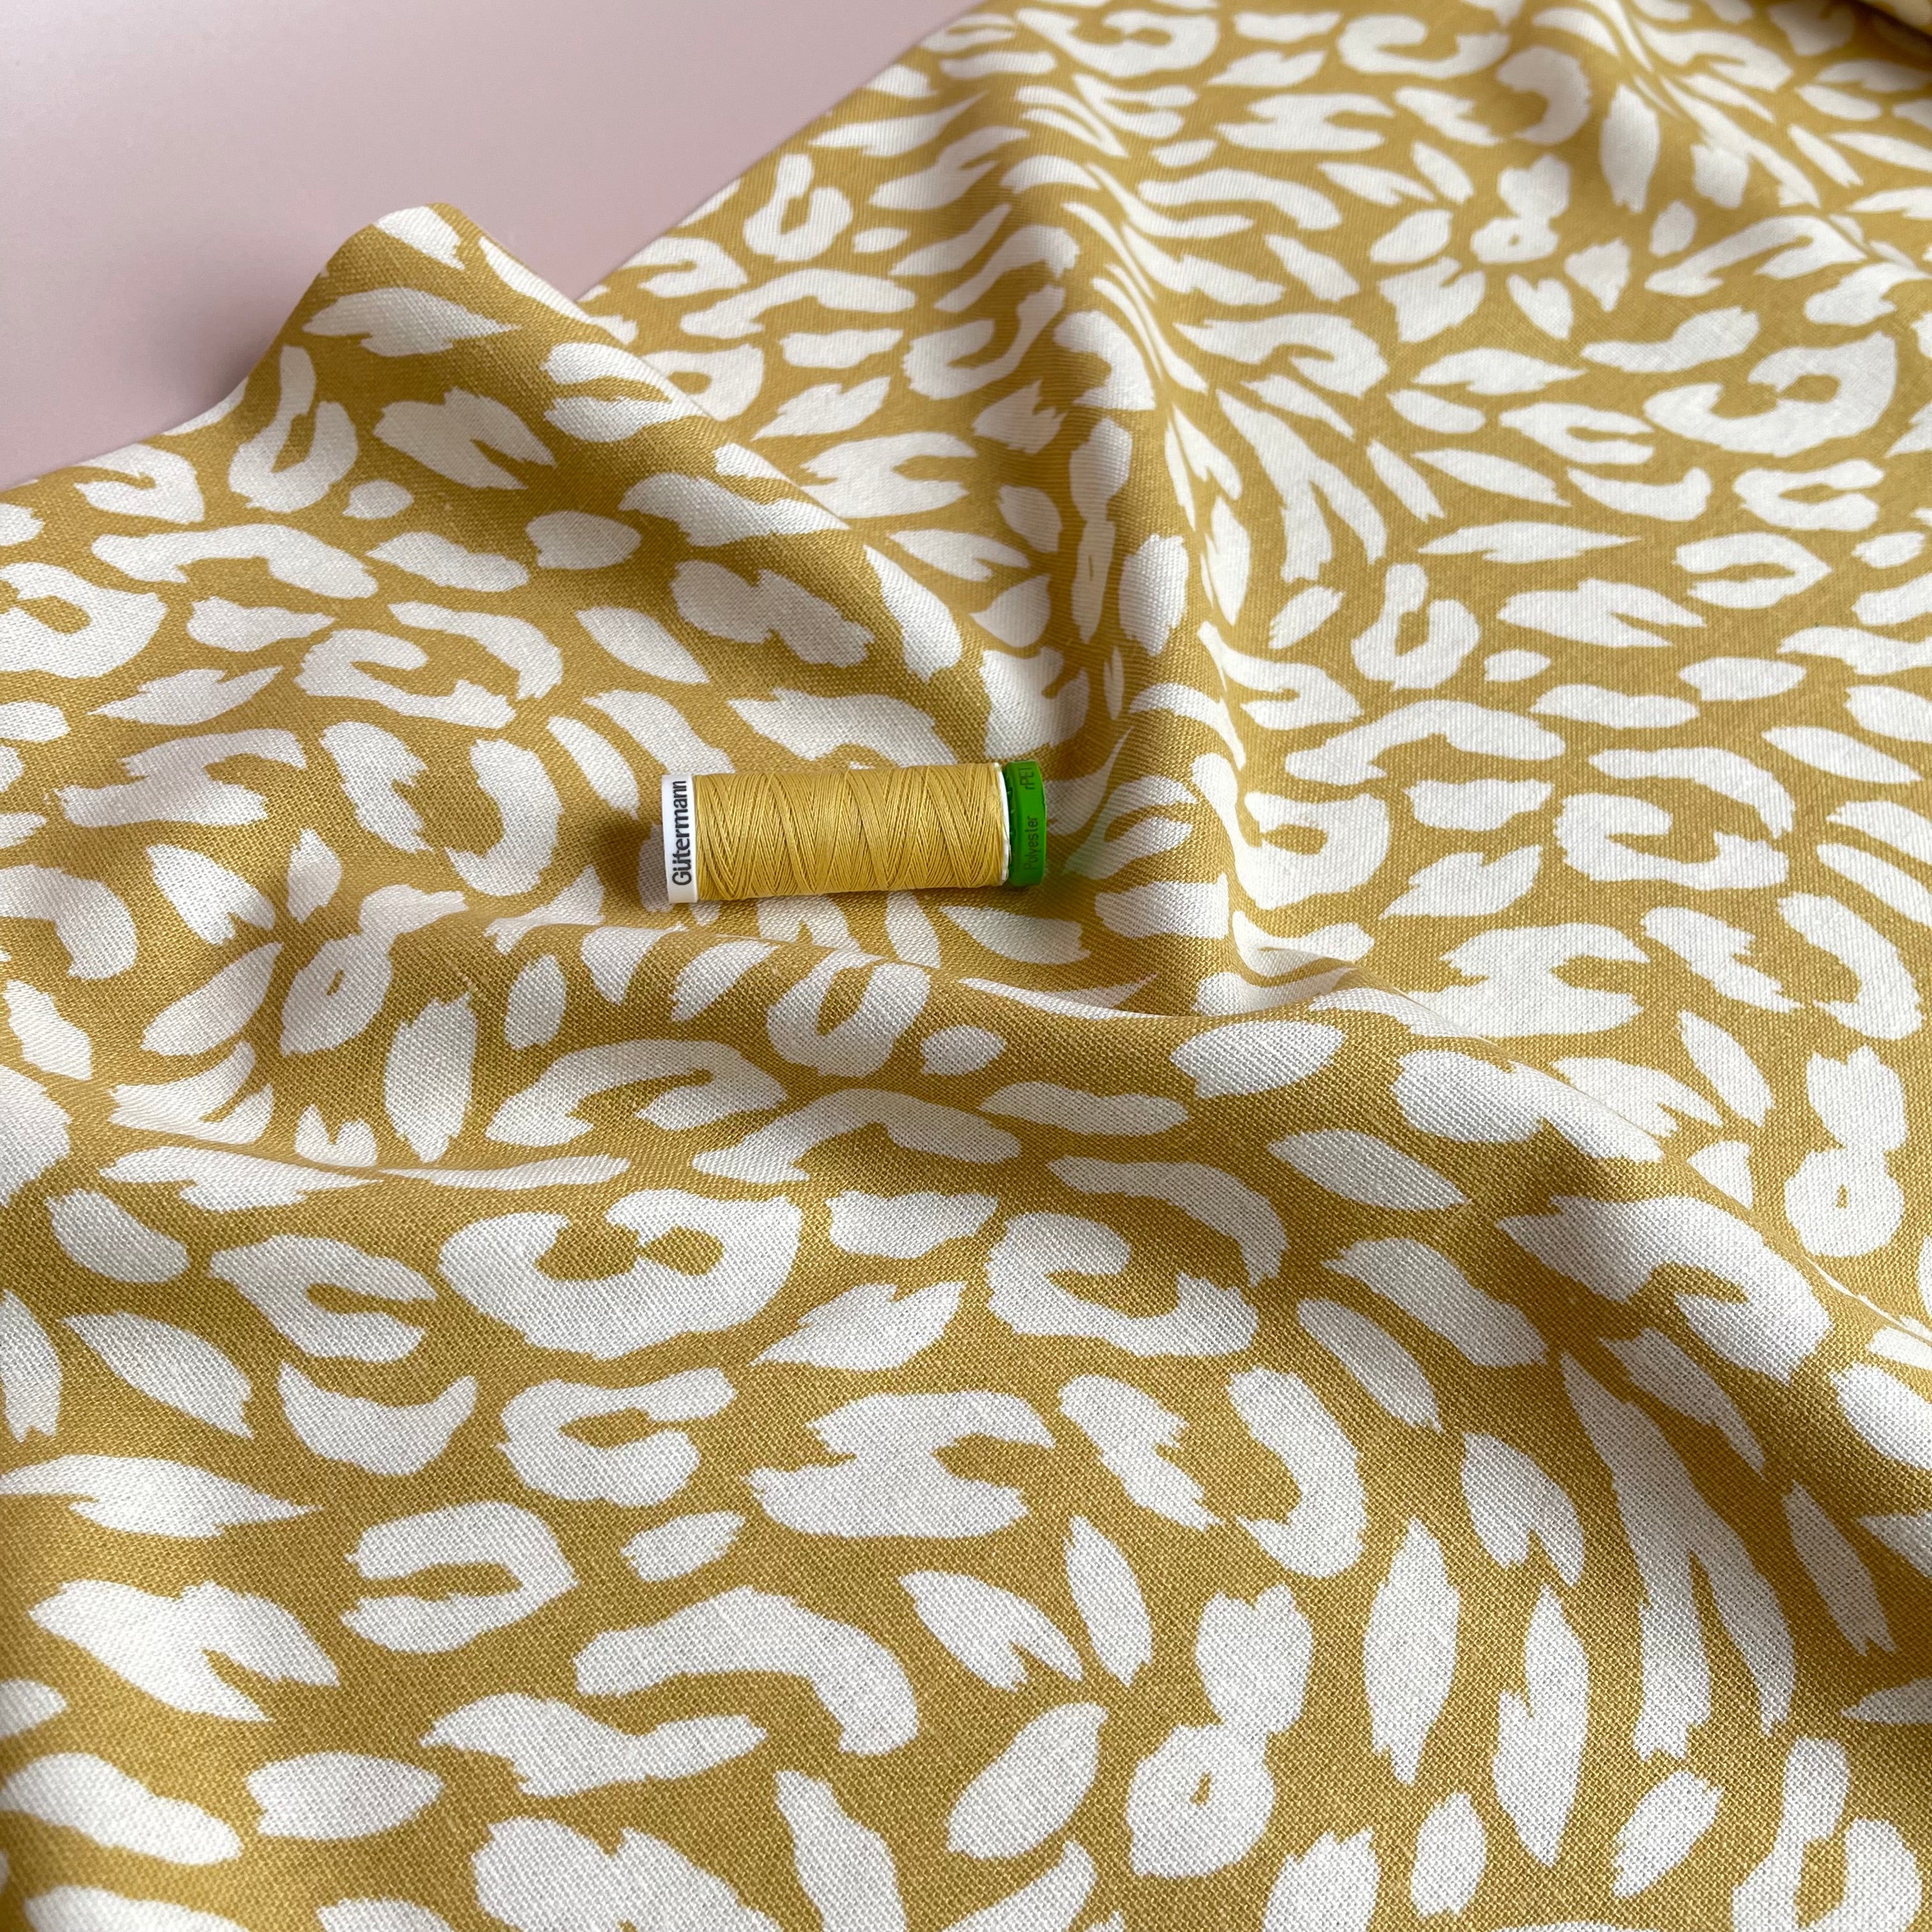 REMNANT 1.5 Metres - Animal Print on Yellow Linen Viscose Blend Fabric